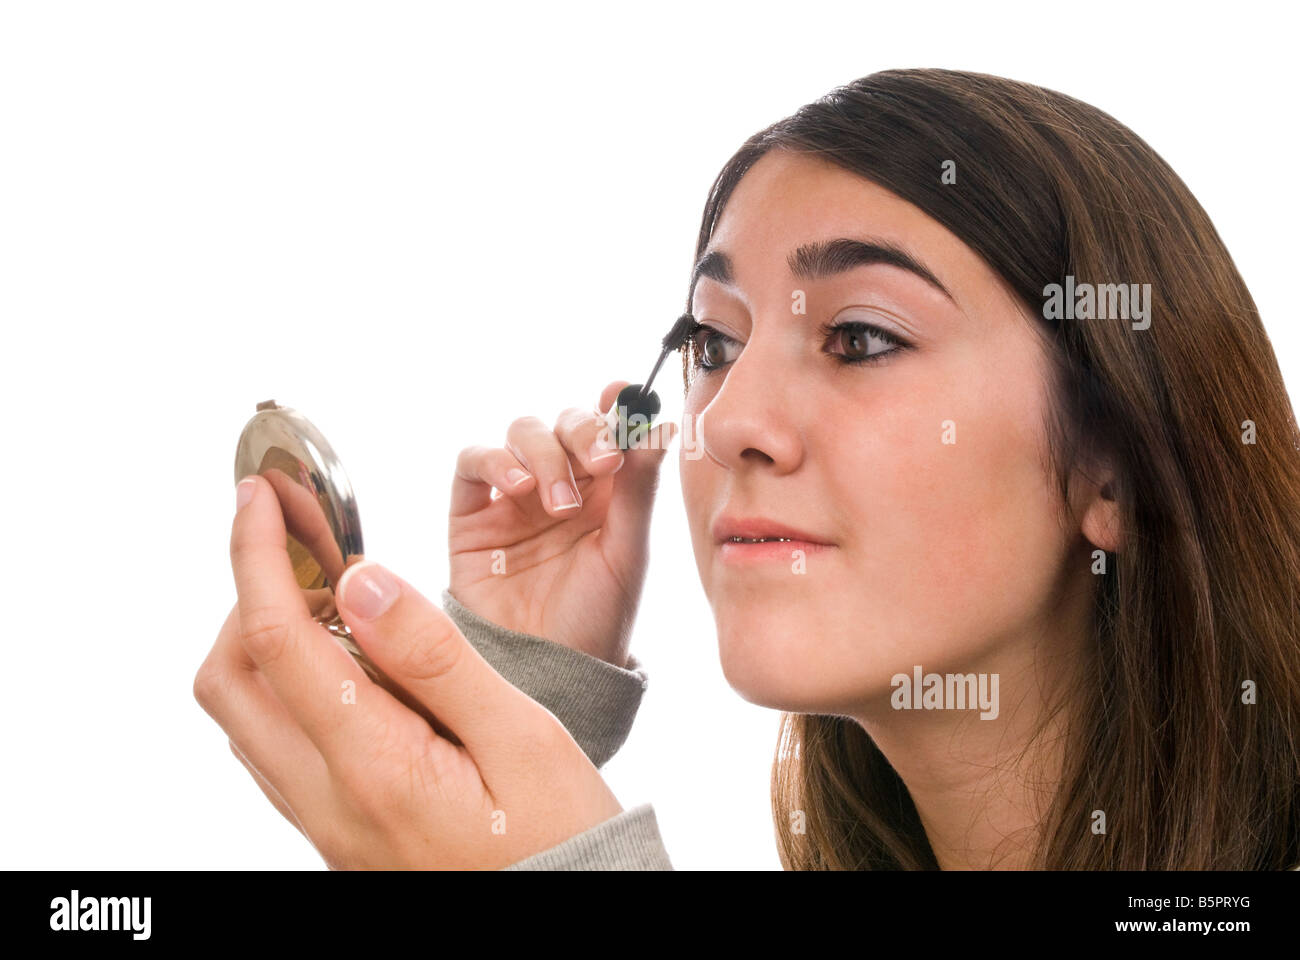 Horizontal portrait of a young girl applying mascara to her eyes in a compact mirror against a white background Stock Photo